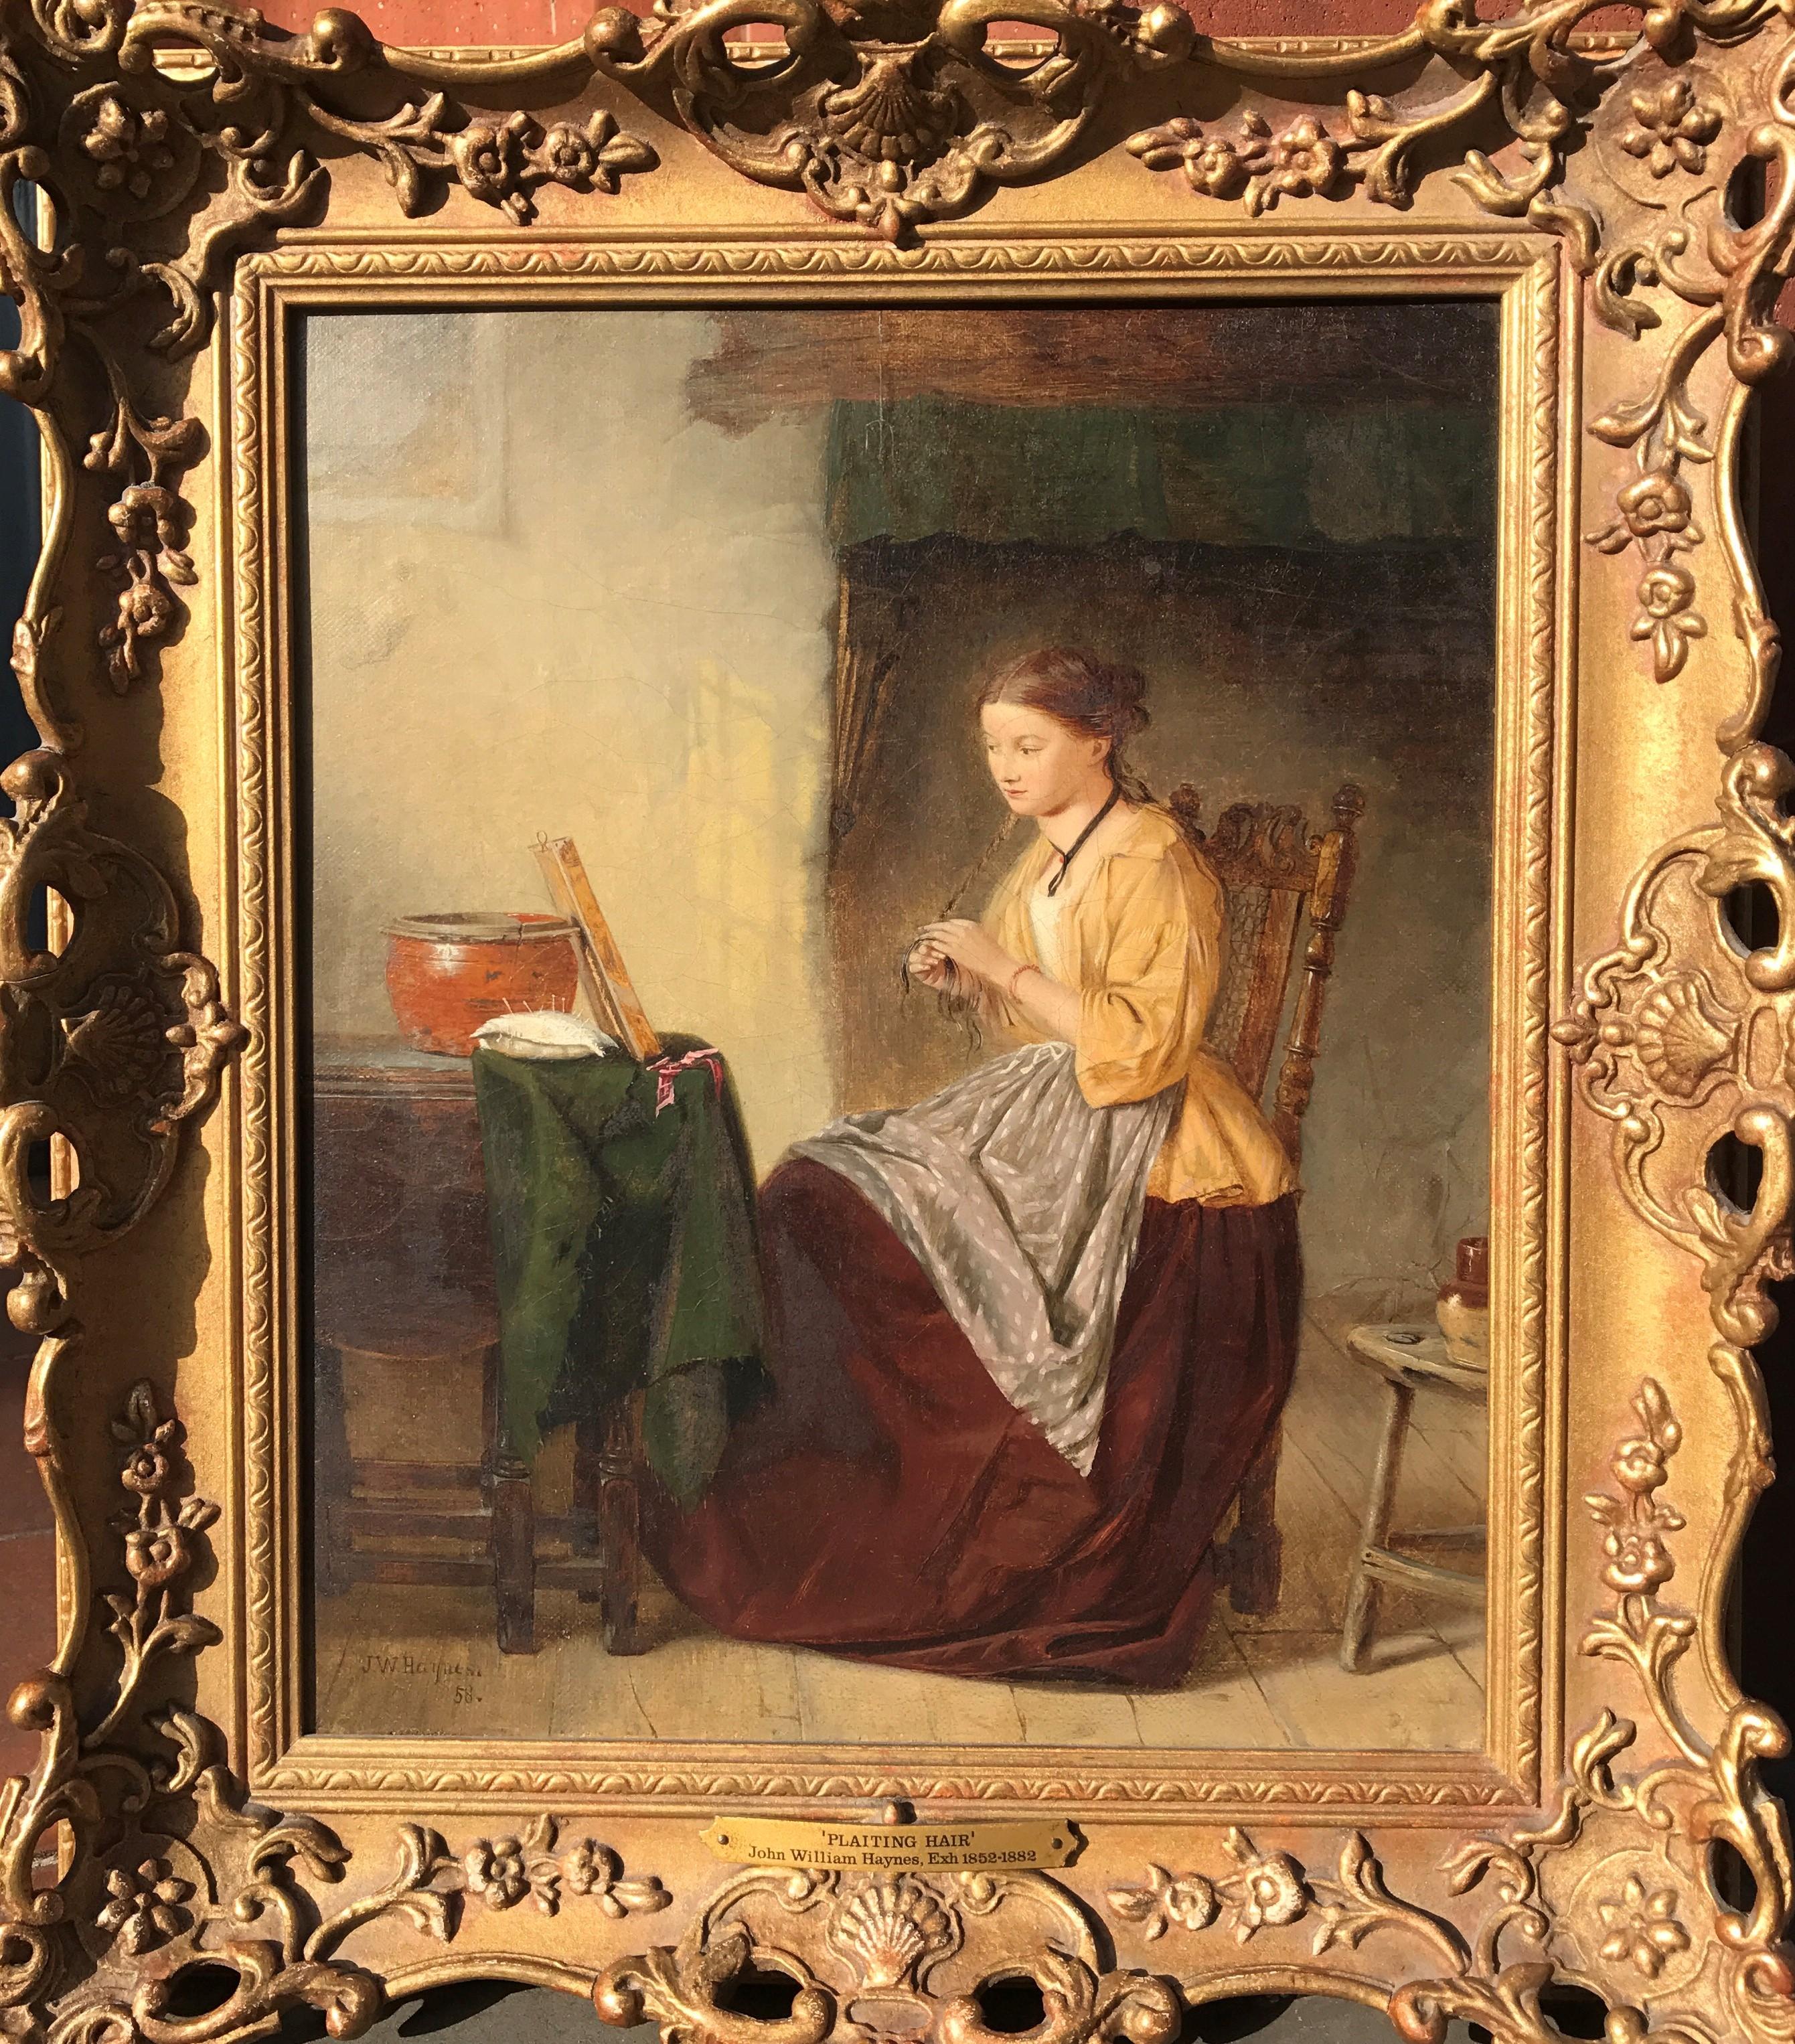 John William HAYNES Interior Painting - 19th Century English Victorian Intimate Oil Painting of Girl plaiting her hair